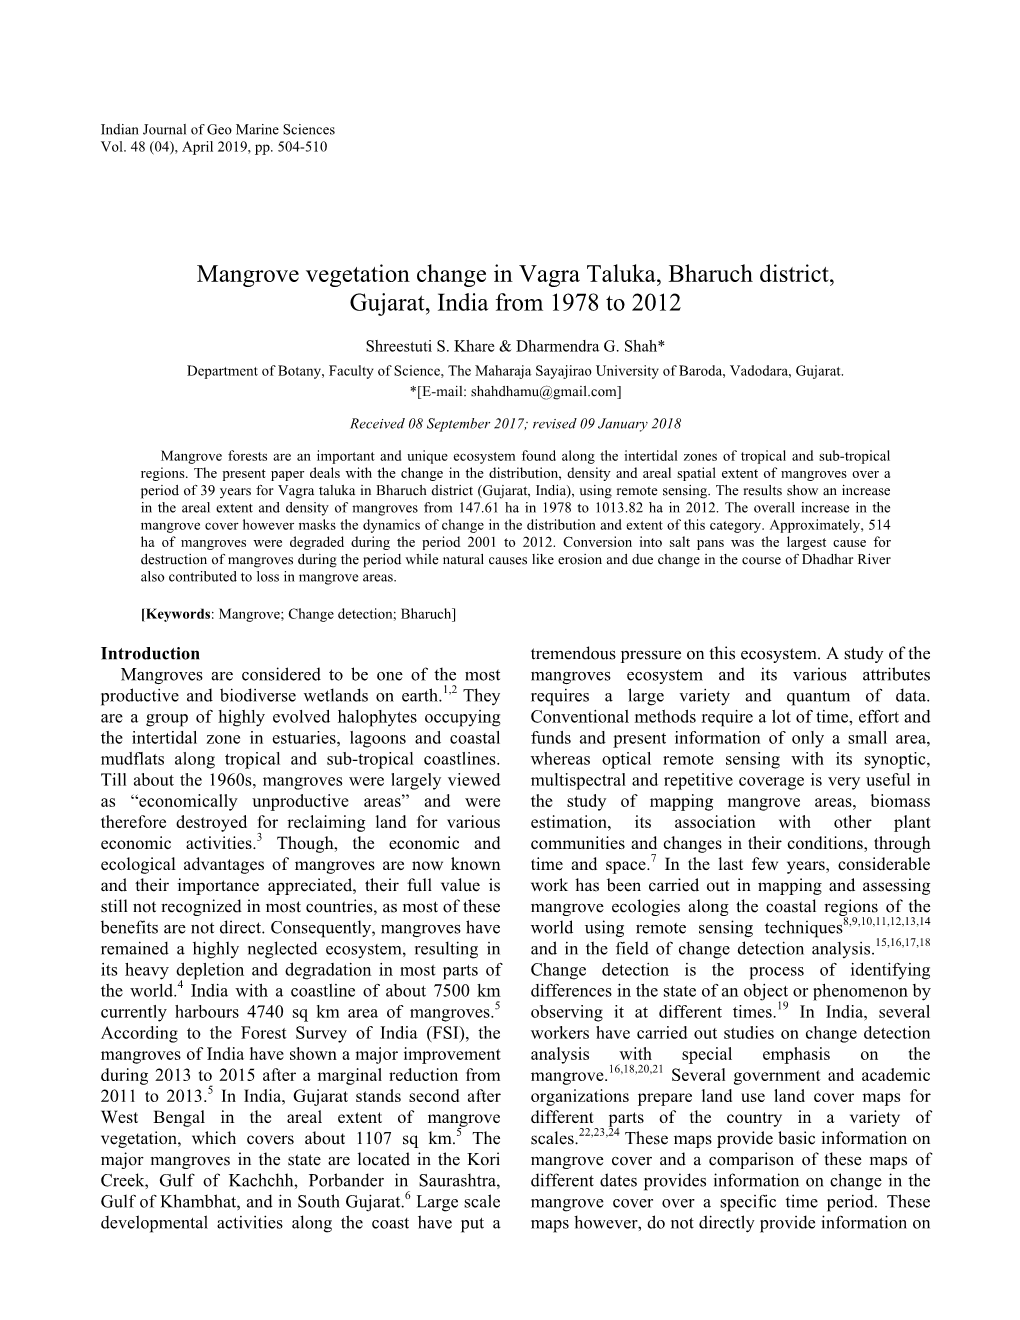 Mangrove Vegetation Change in Vagra Taluka, Bharuch District, Gujarat, India from 1978 to 2012